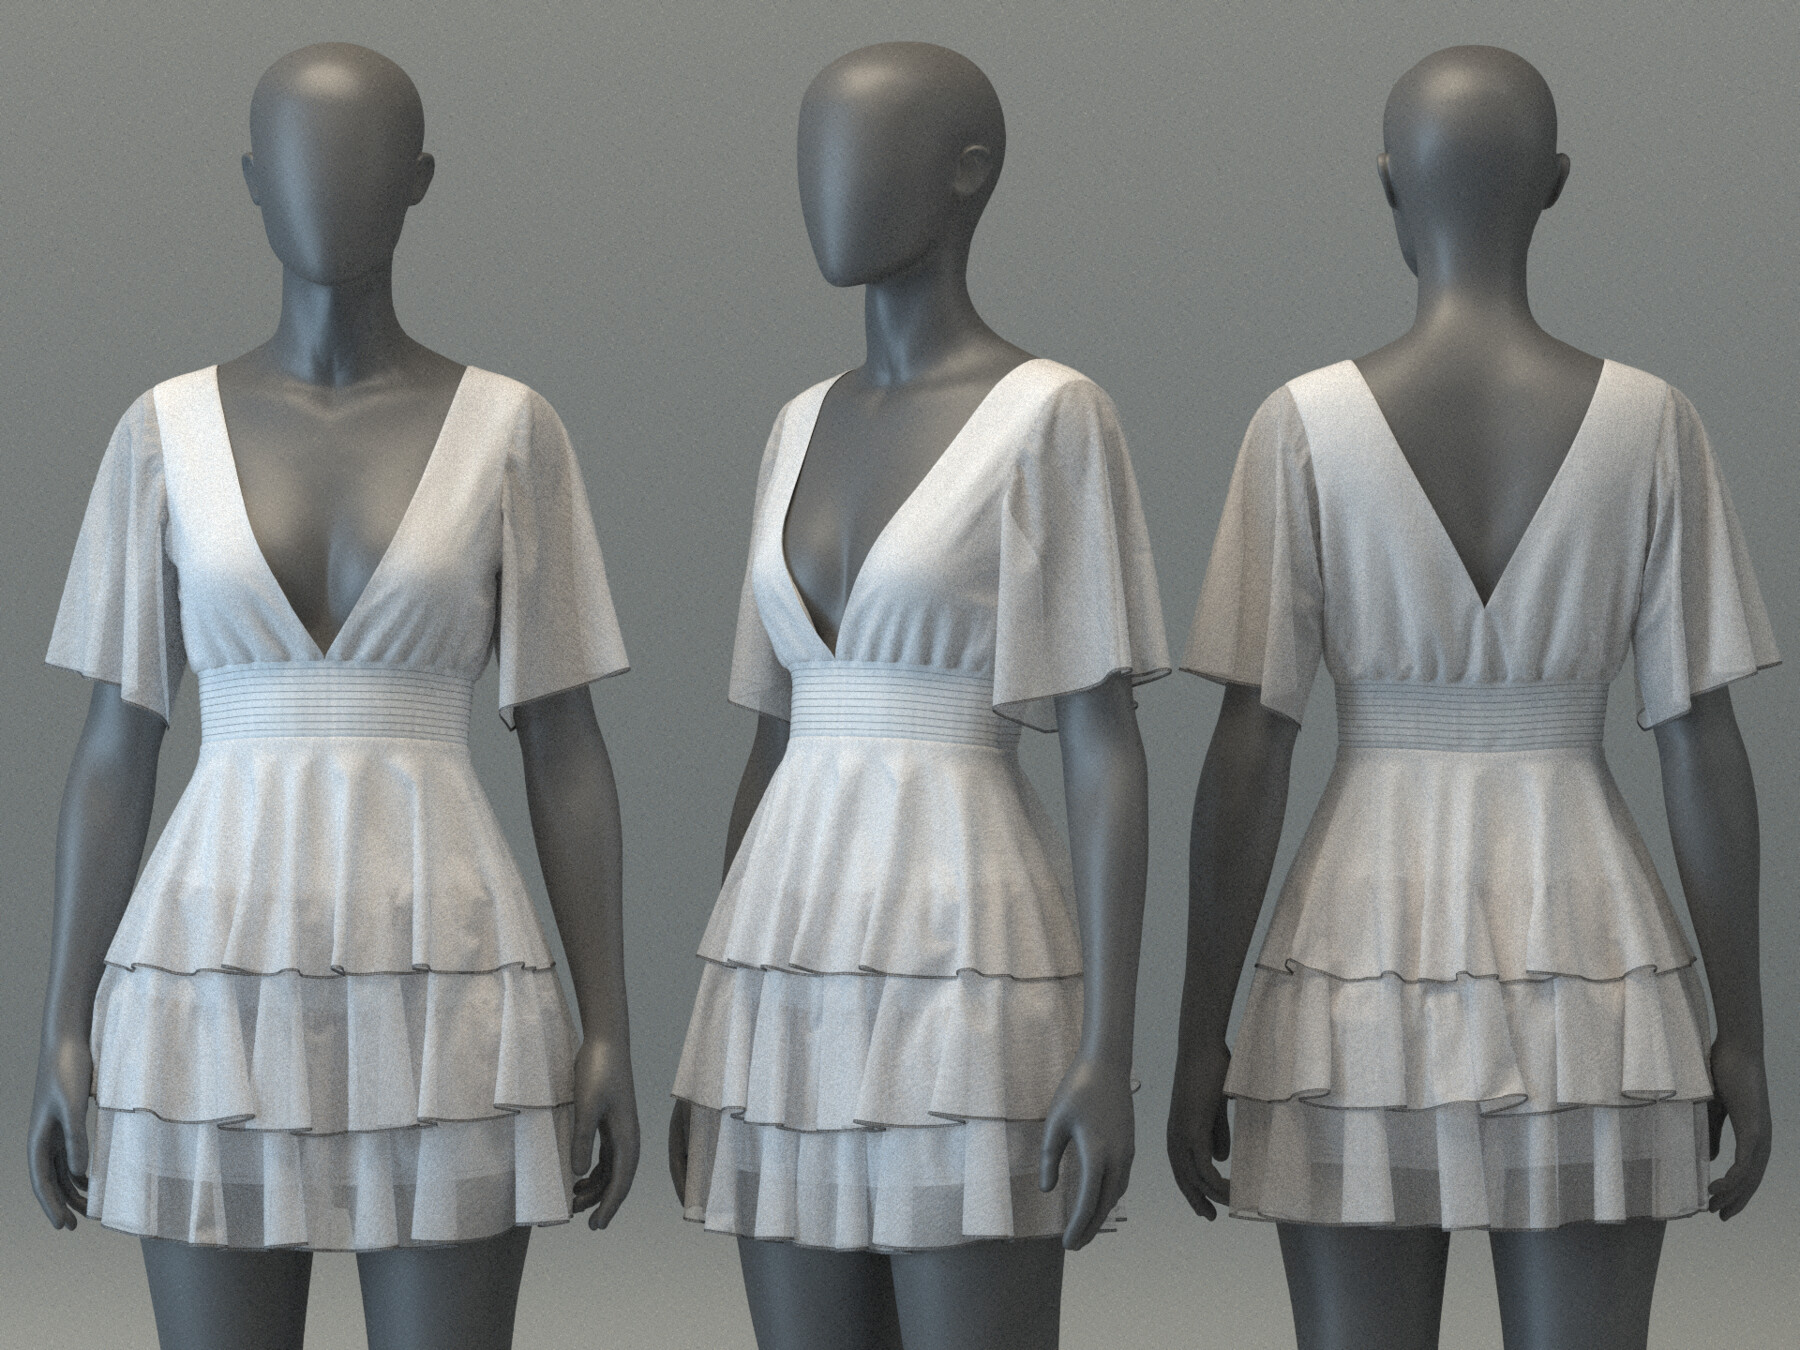 ArtStation - Dress with Layered Skirt | Resources